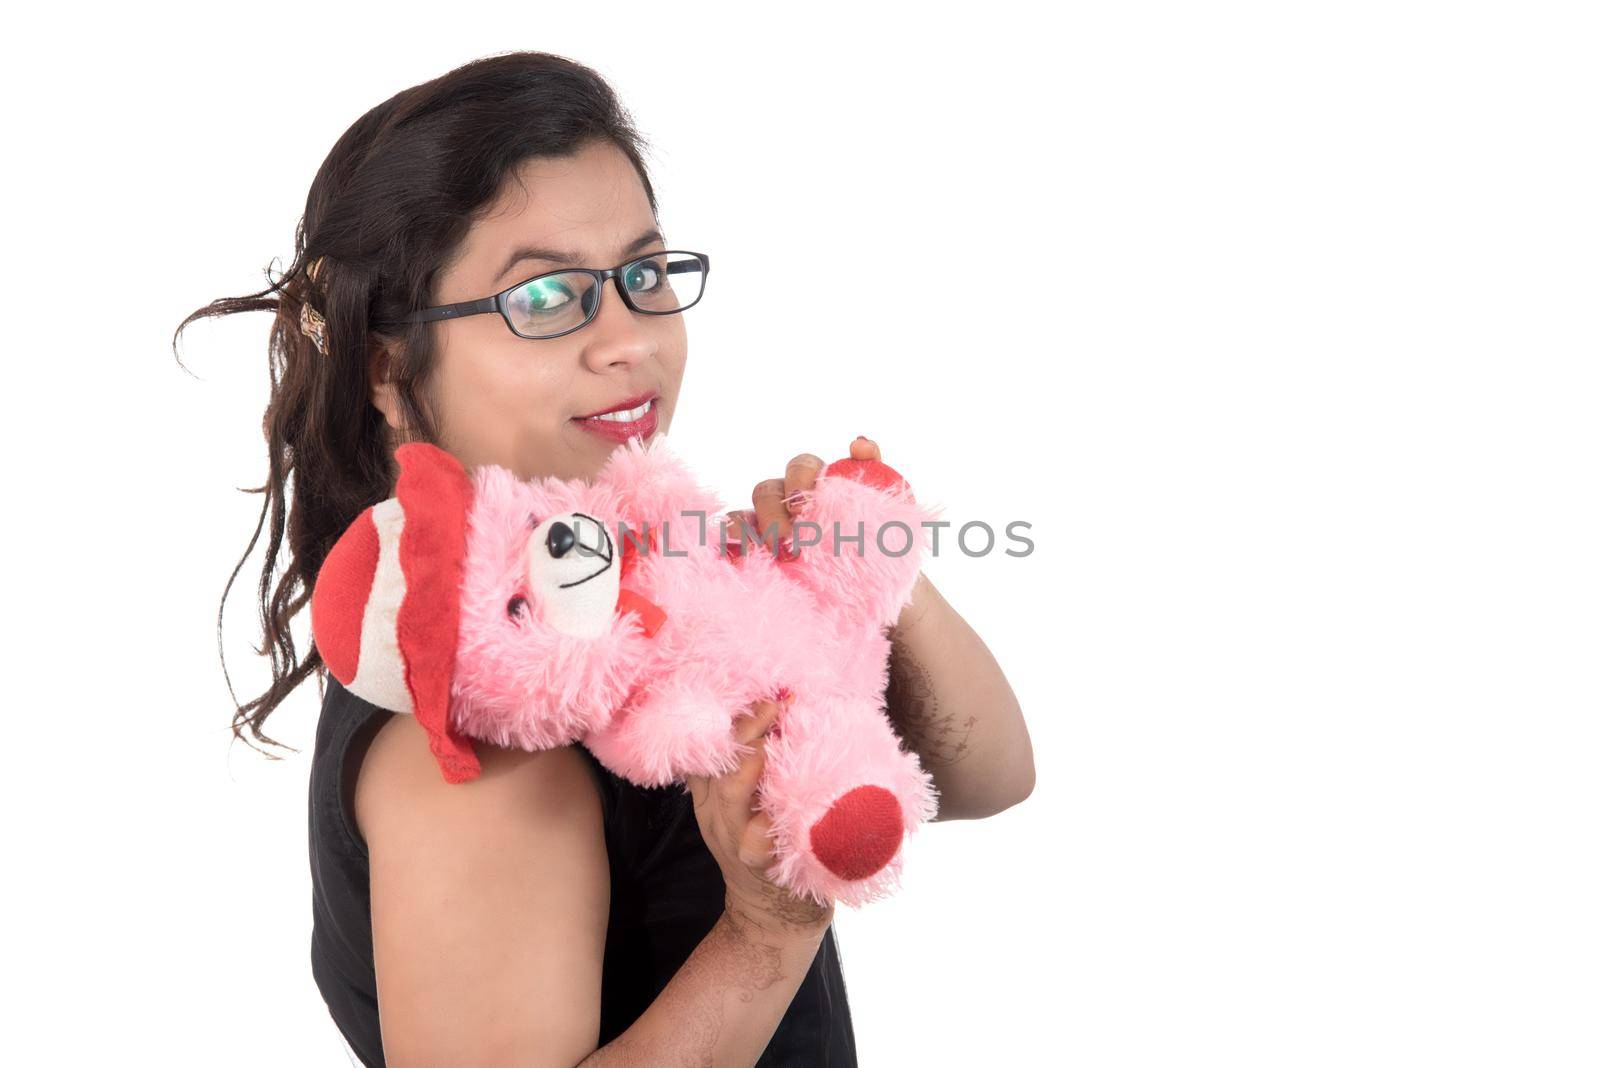 Beautiful young girl holding and playing with a teddy bear toy on a white background. by DipakShelare